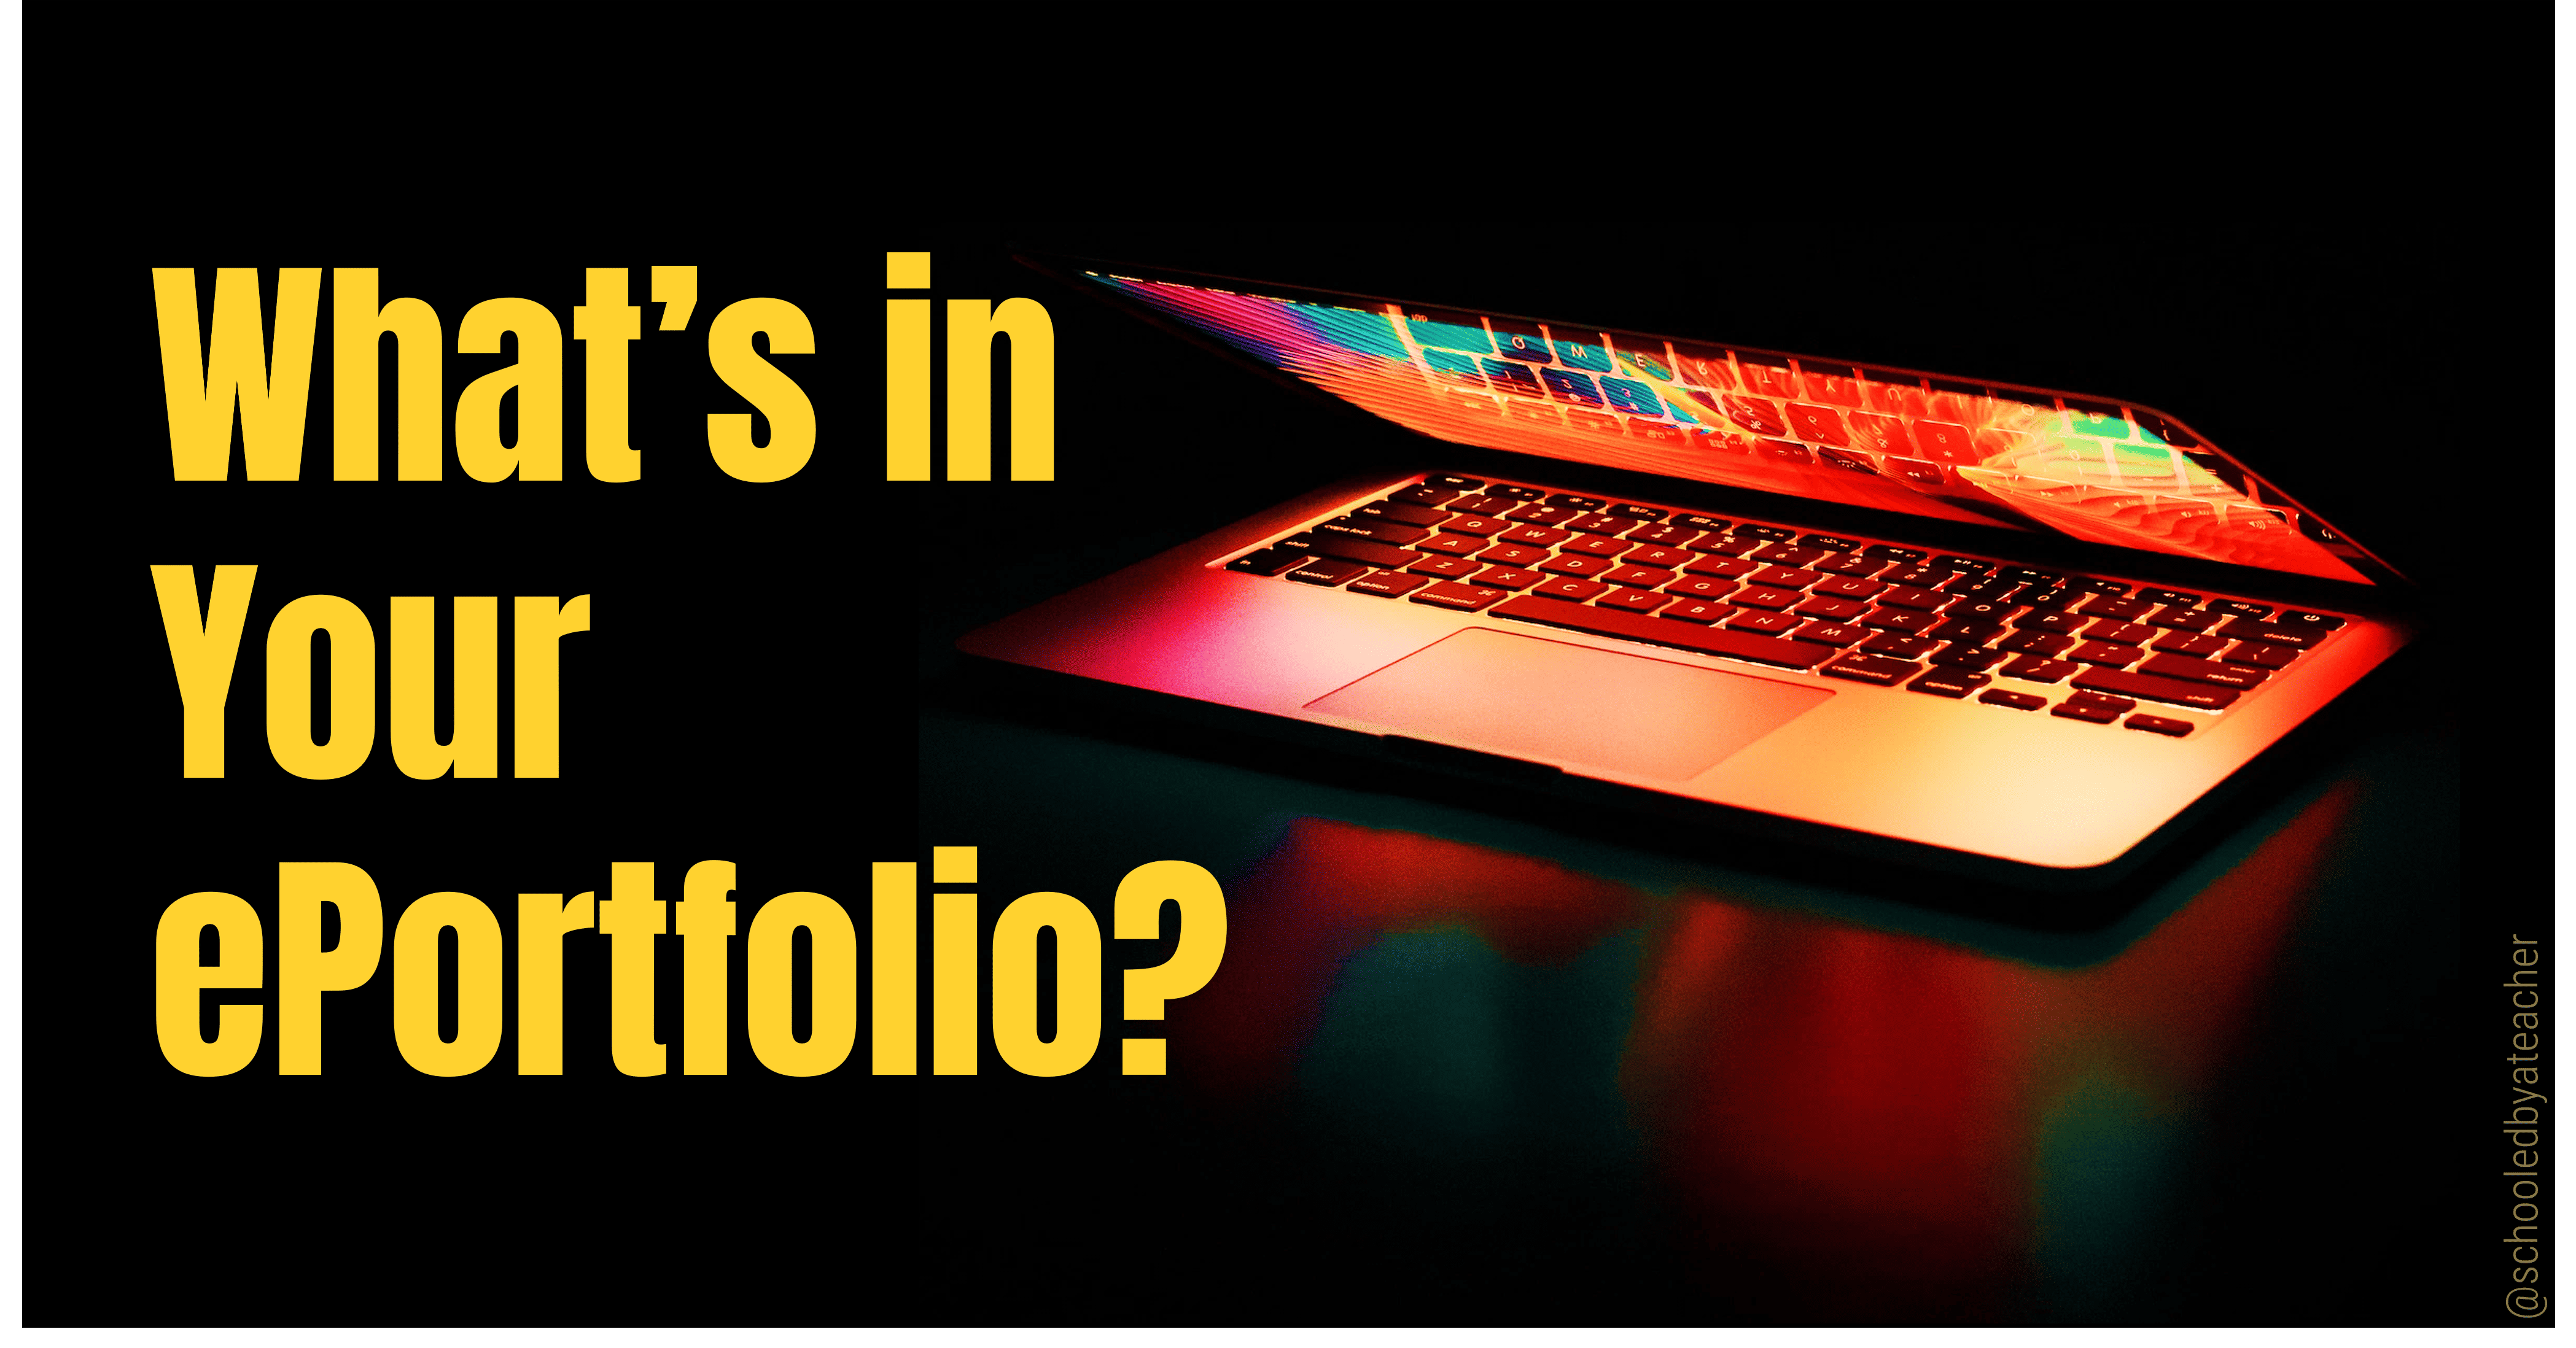 5 CONTENT Tips for a Stand-Out ePortfolio